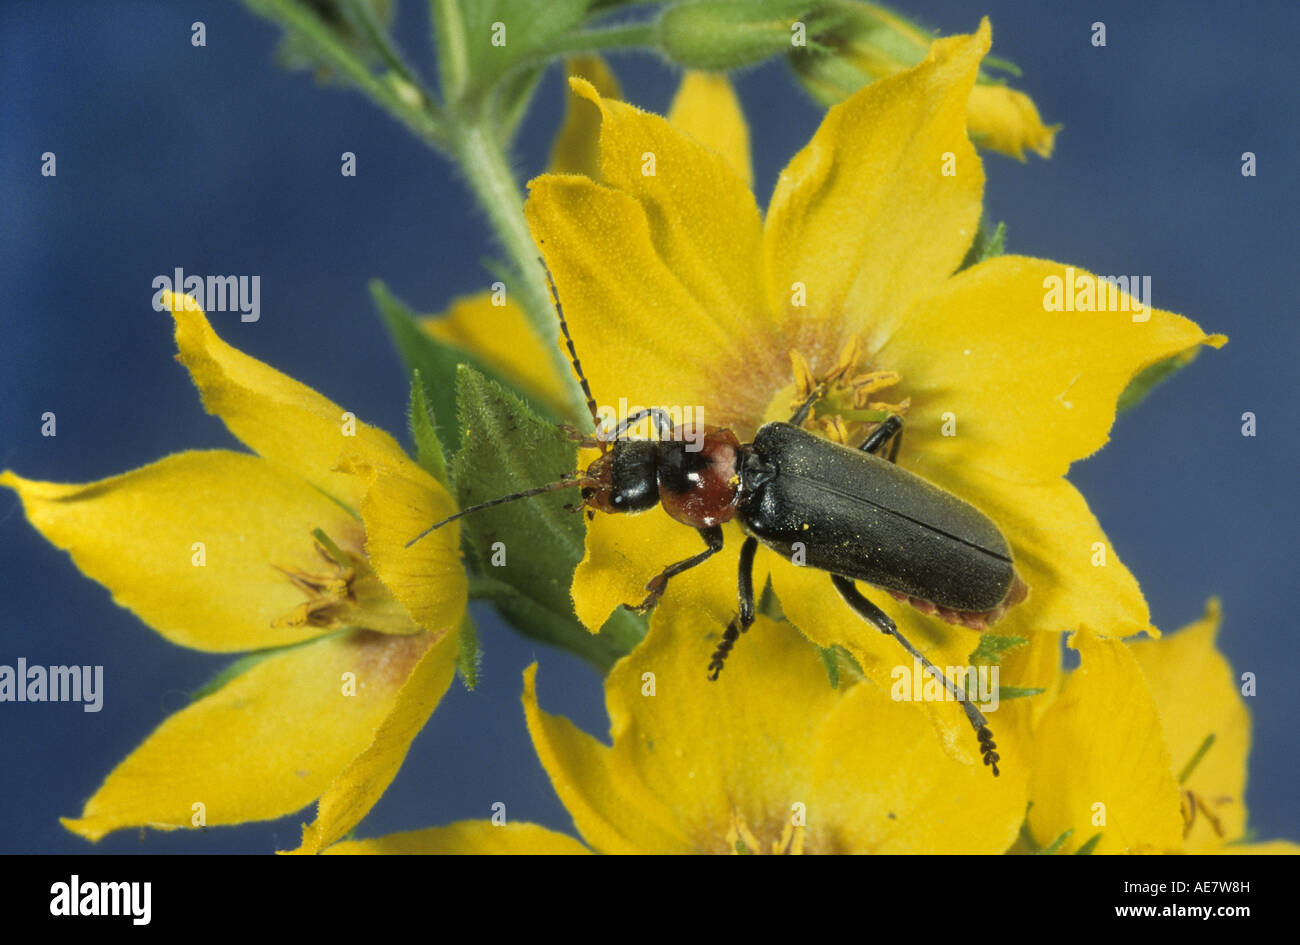 common cantharid, common soldier beetle (Cantharis fusca), on spotted loosestrife (Lysimachia punctata) Stock Photo